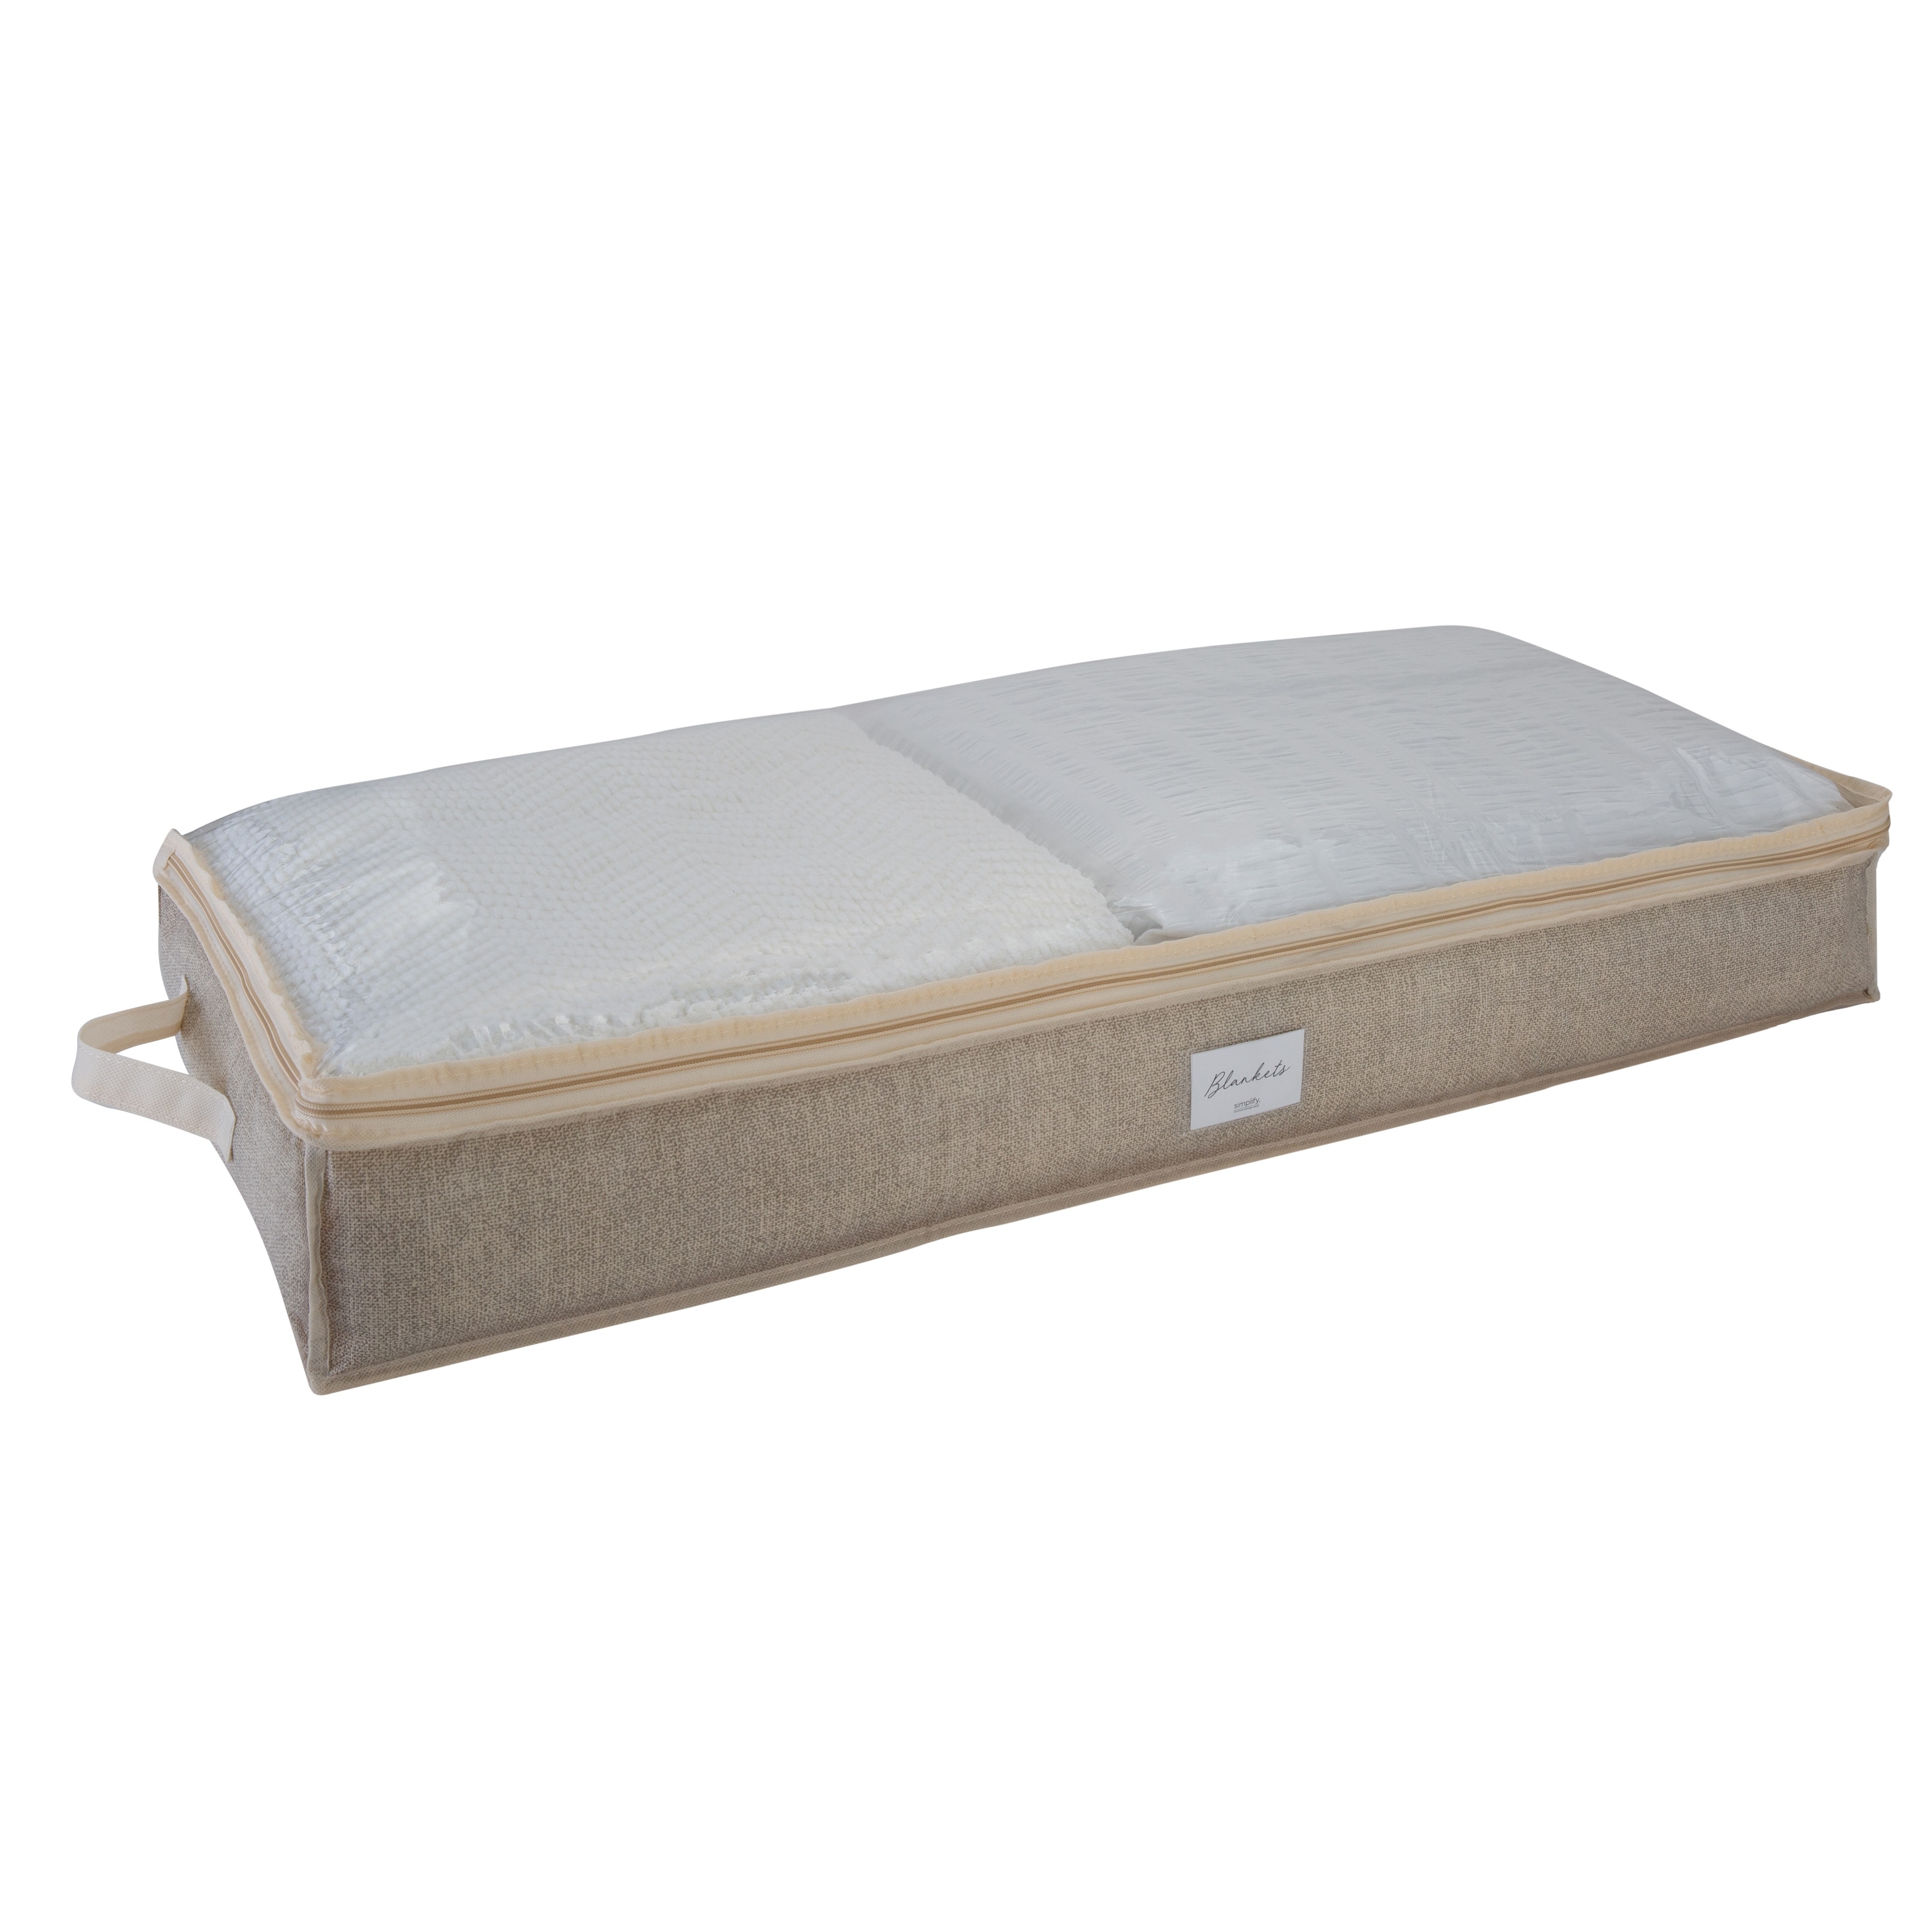 Simplify Under the Bed Storage Bag in Faux Jute - L40x W18x H6 - On Sale -  Bed Bath & Beyond - 8552382